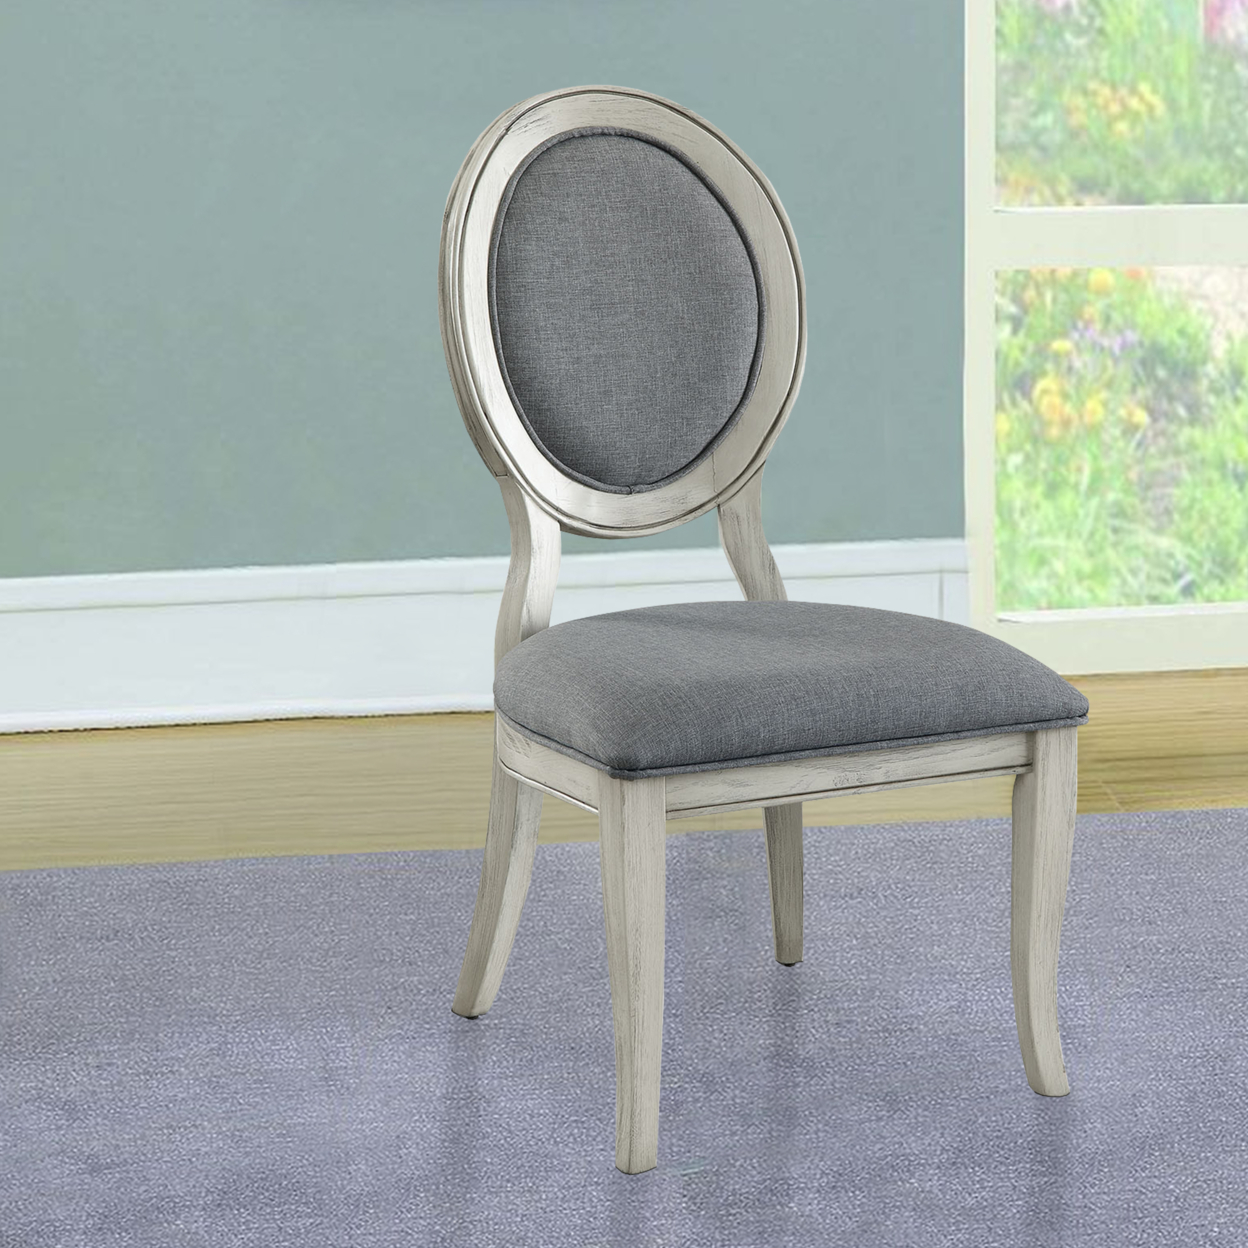 Fabric Upholstery Side Chair, White And Gray, Pack Of Two- Saltoro Sherpi